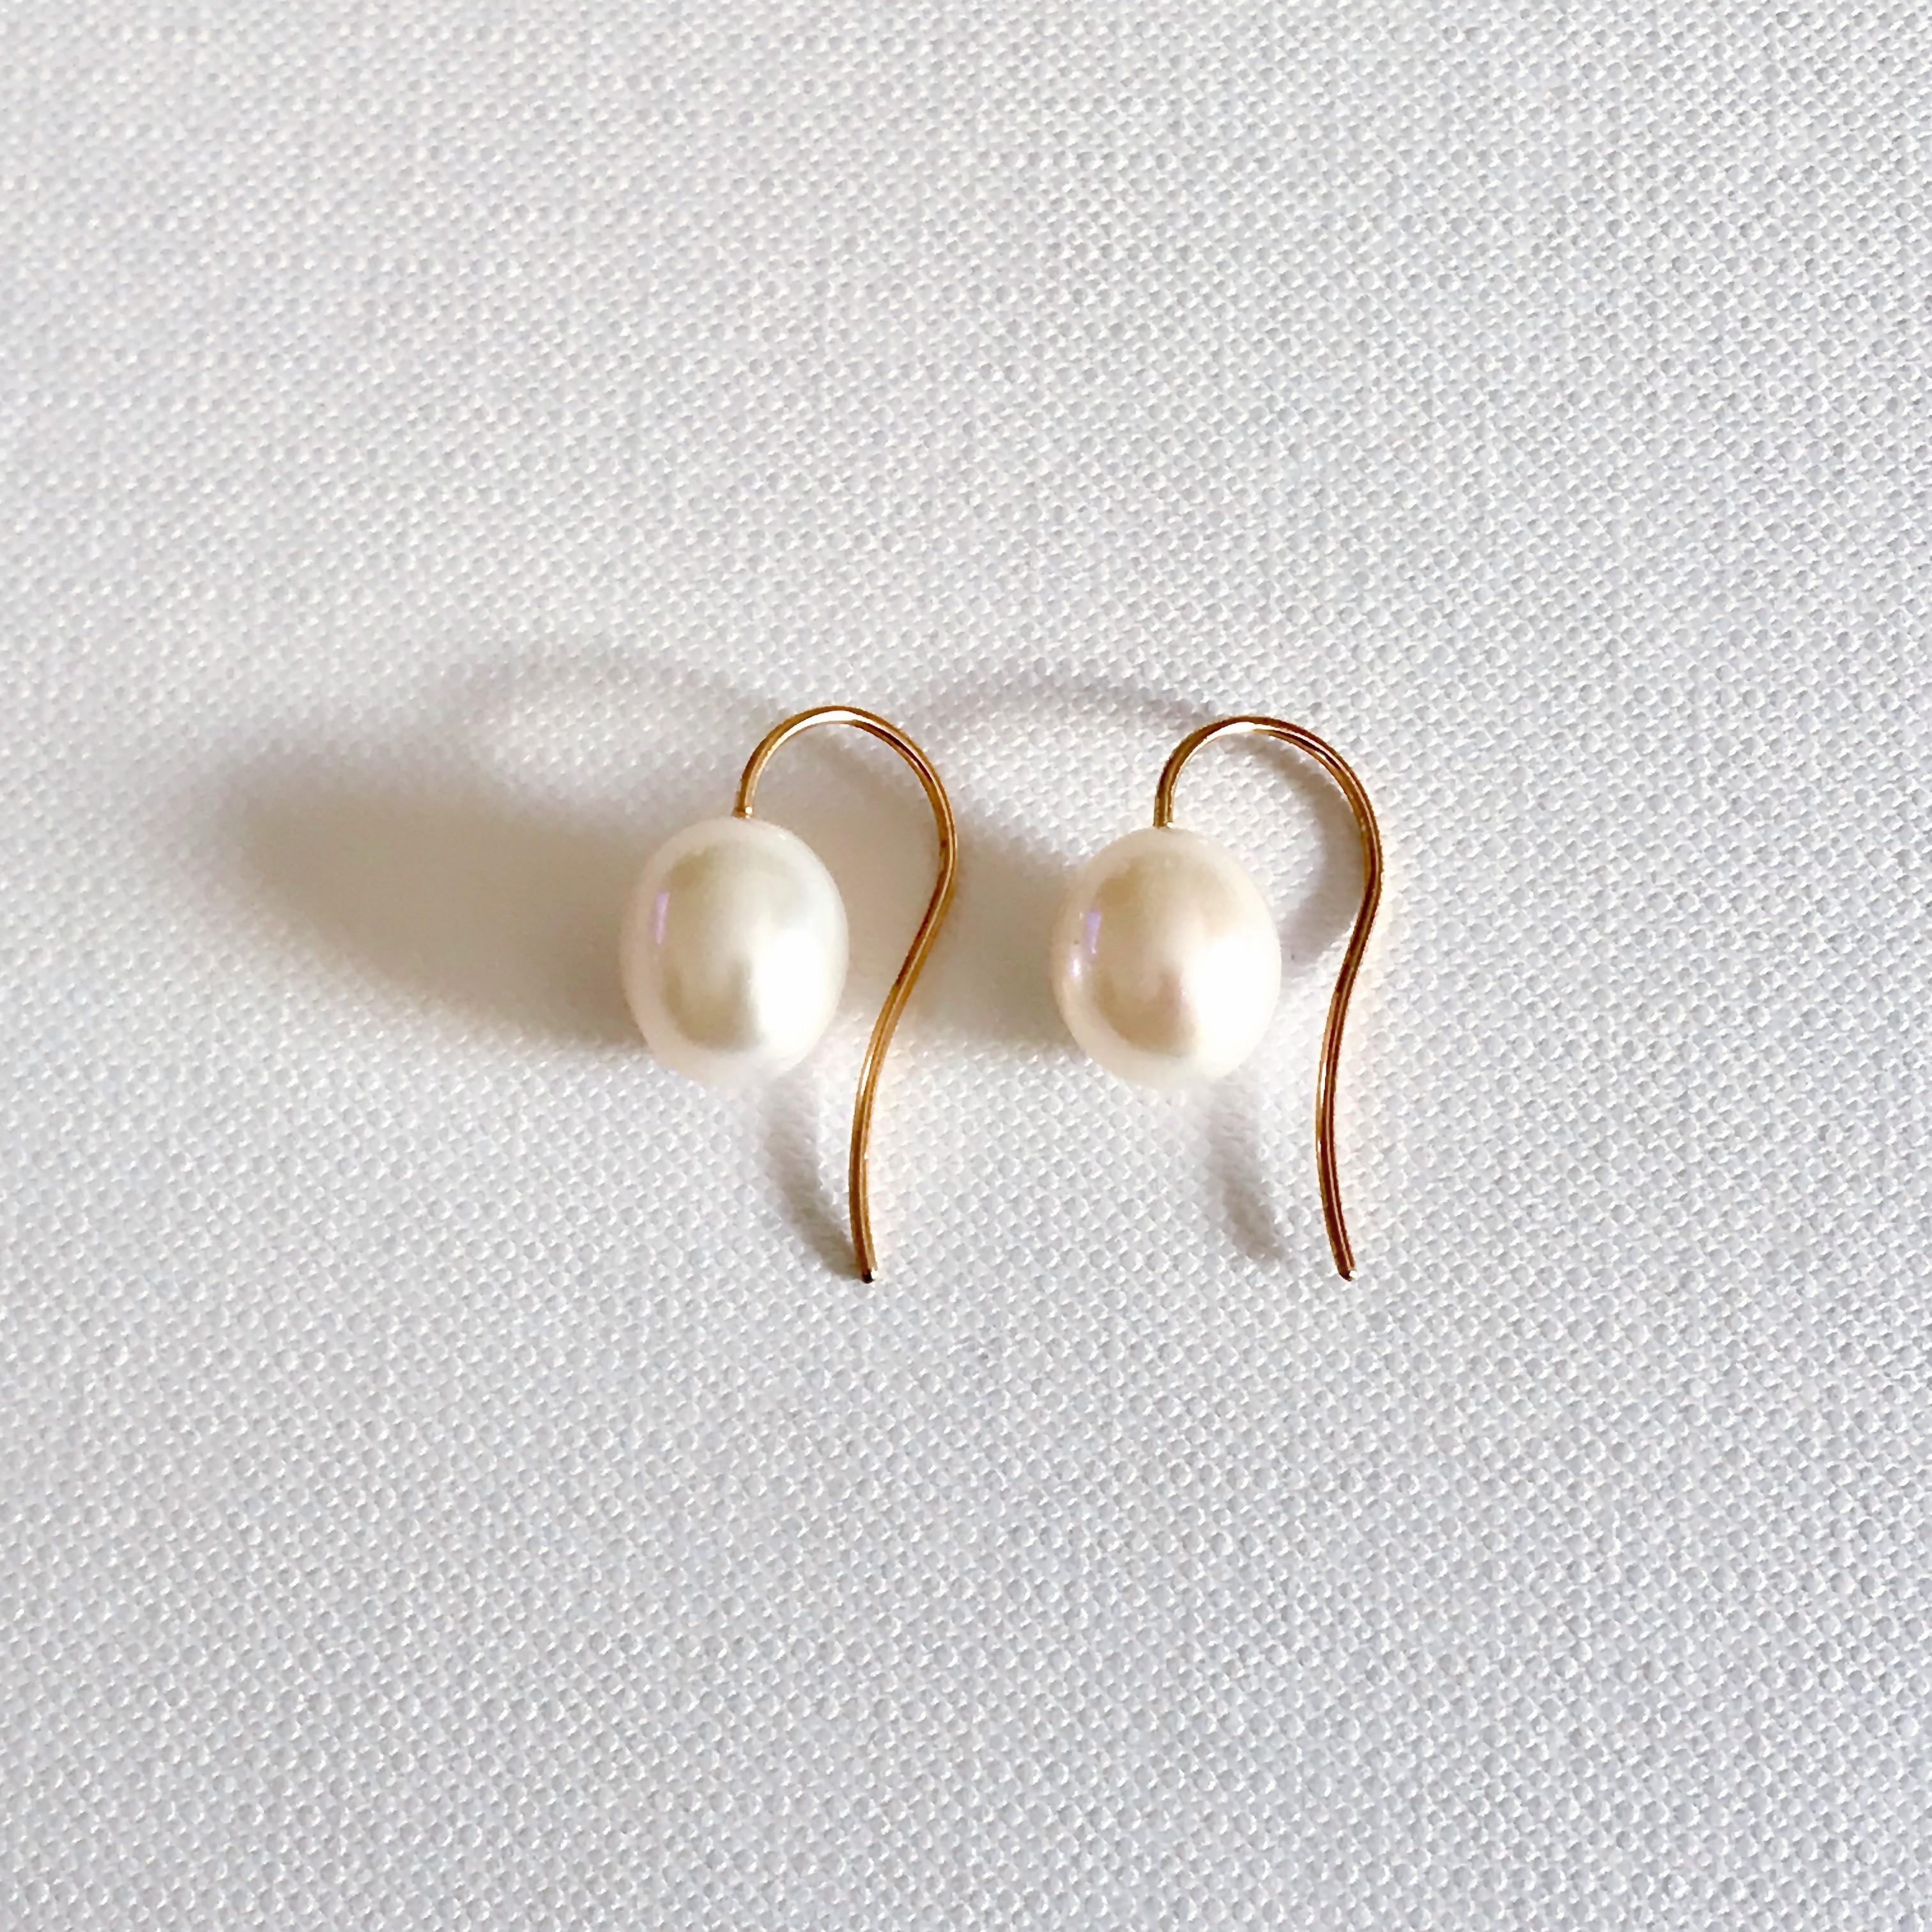 18 Karat solid yellow gold freshwater cultured pearl hook earrings. 
Easy to wear with any type of outfit throughout the year.
Height: 26.00mm
Drop's height: 20.00mm
Width: 10.00mm
All our jewellery are new and have never been previously owned. 
We